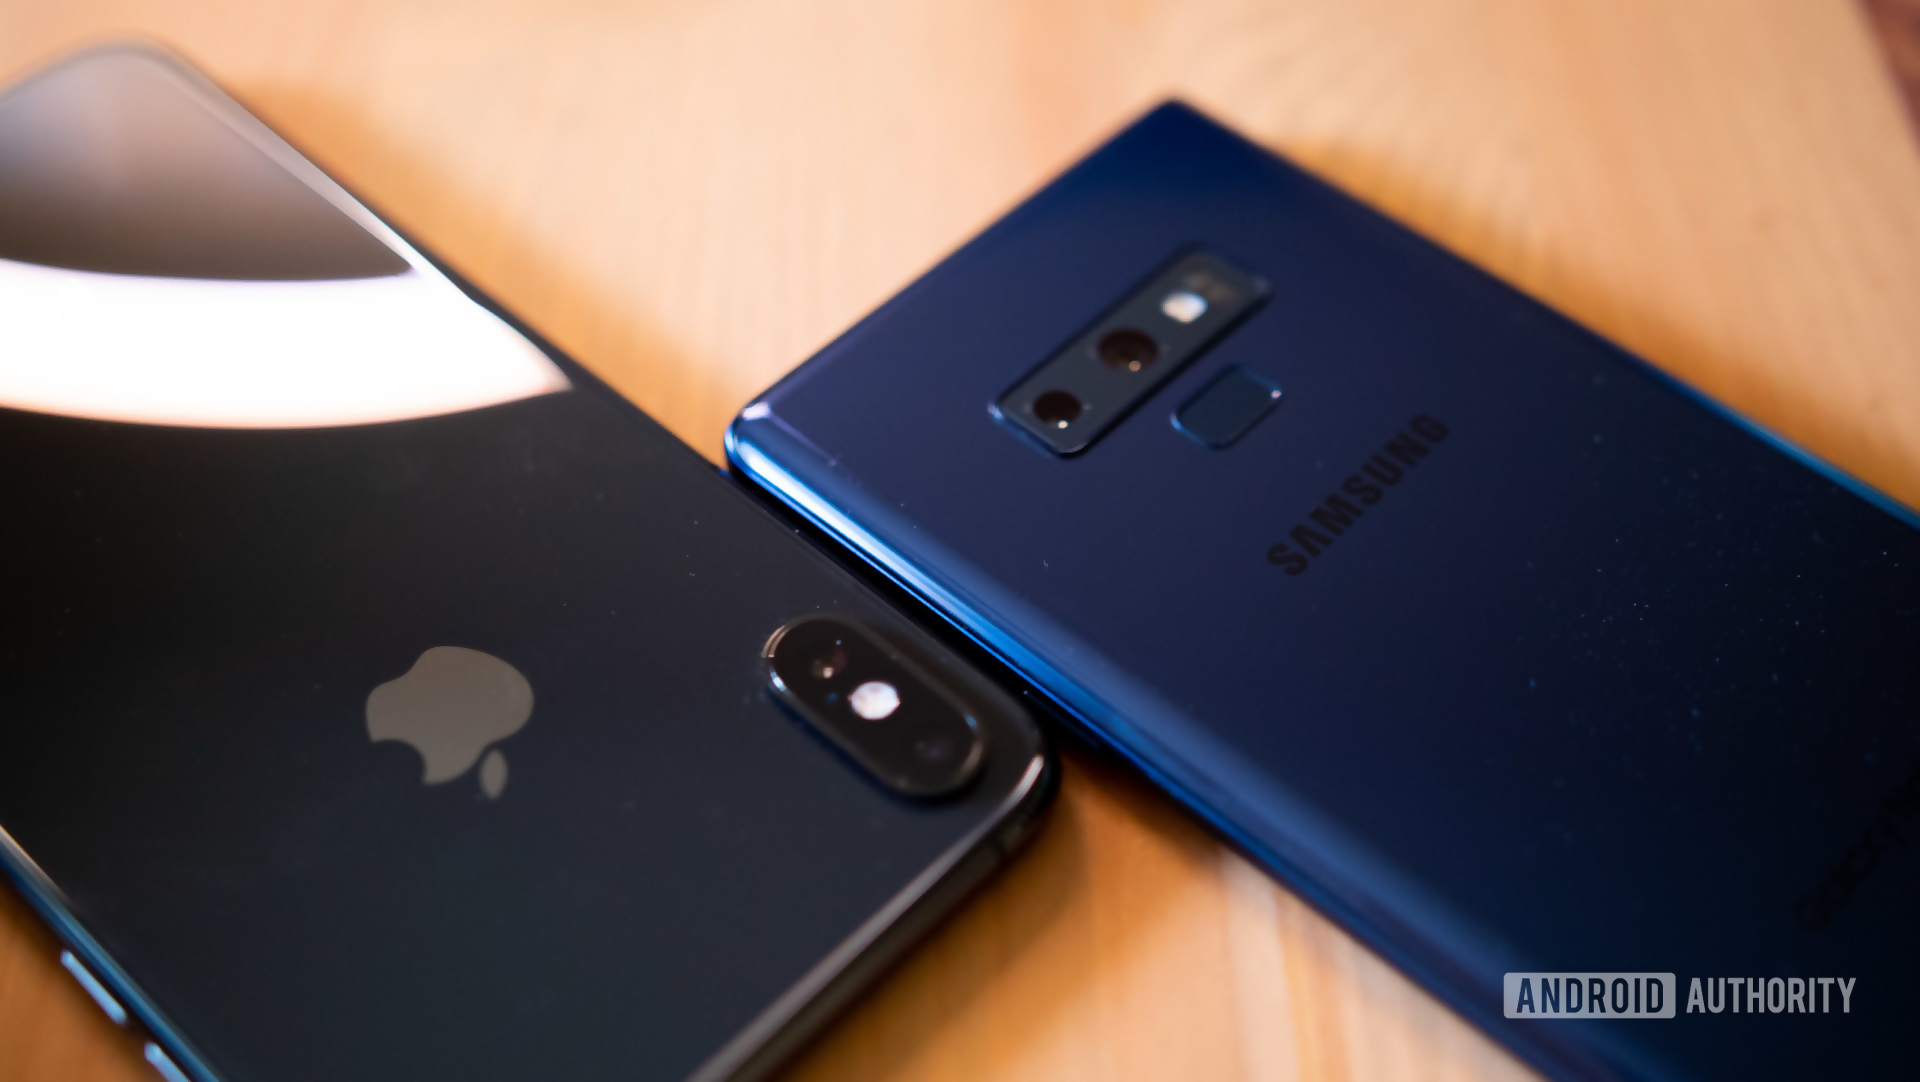 Apple’s iPhone XS and Samsung’s Note 10